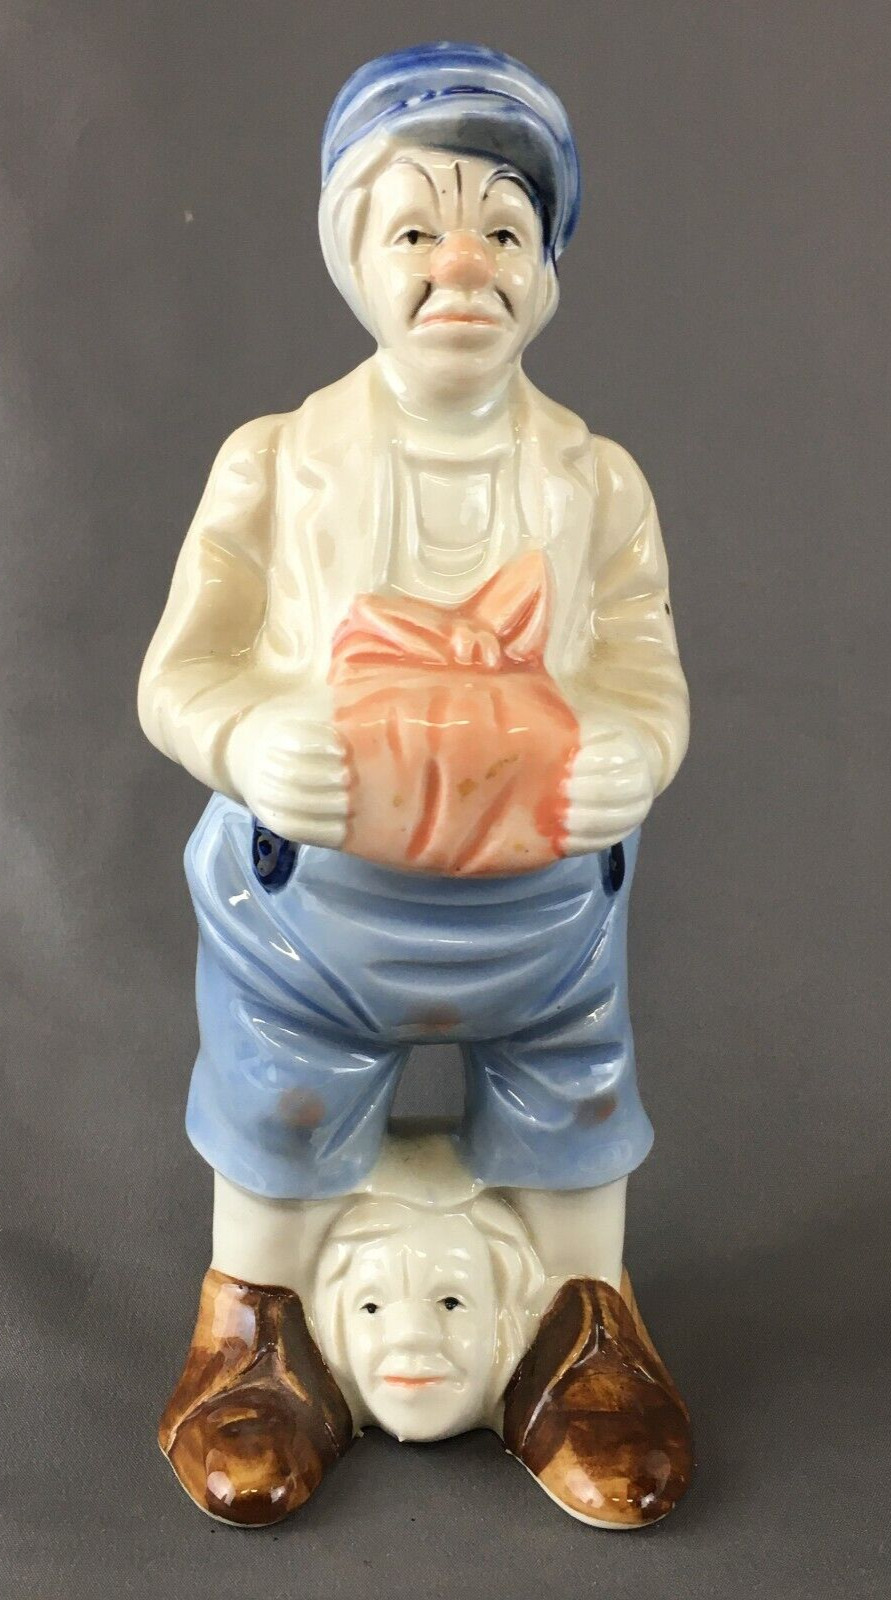 Vintage Porcelain Sad Faced Hobo Clown with Head Between Feet Front & Back